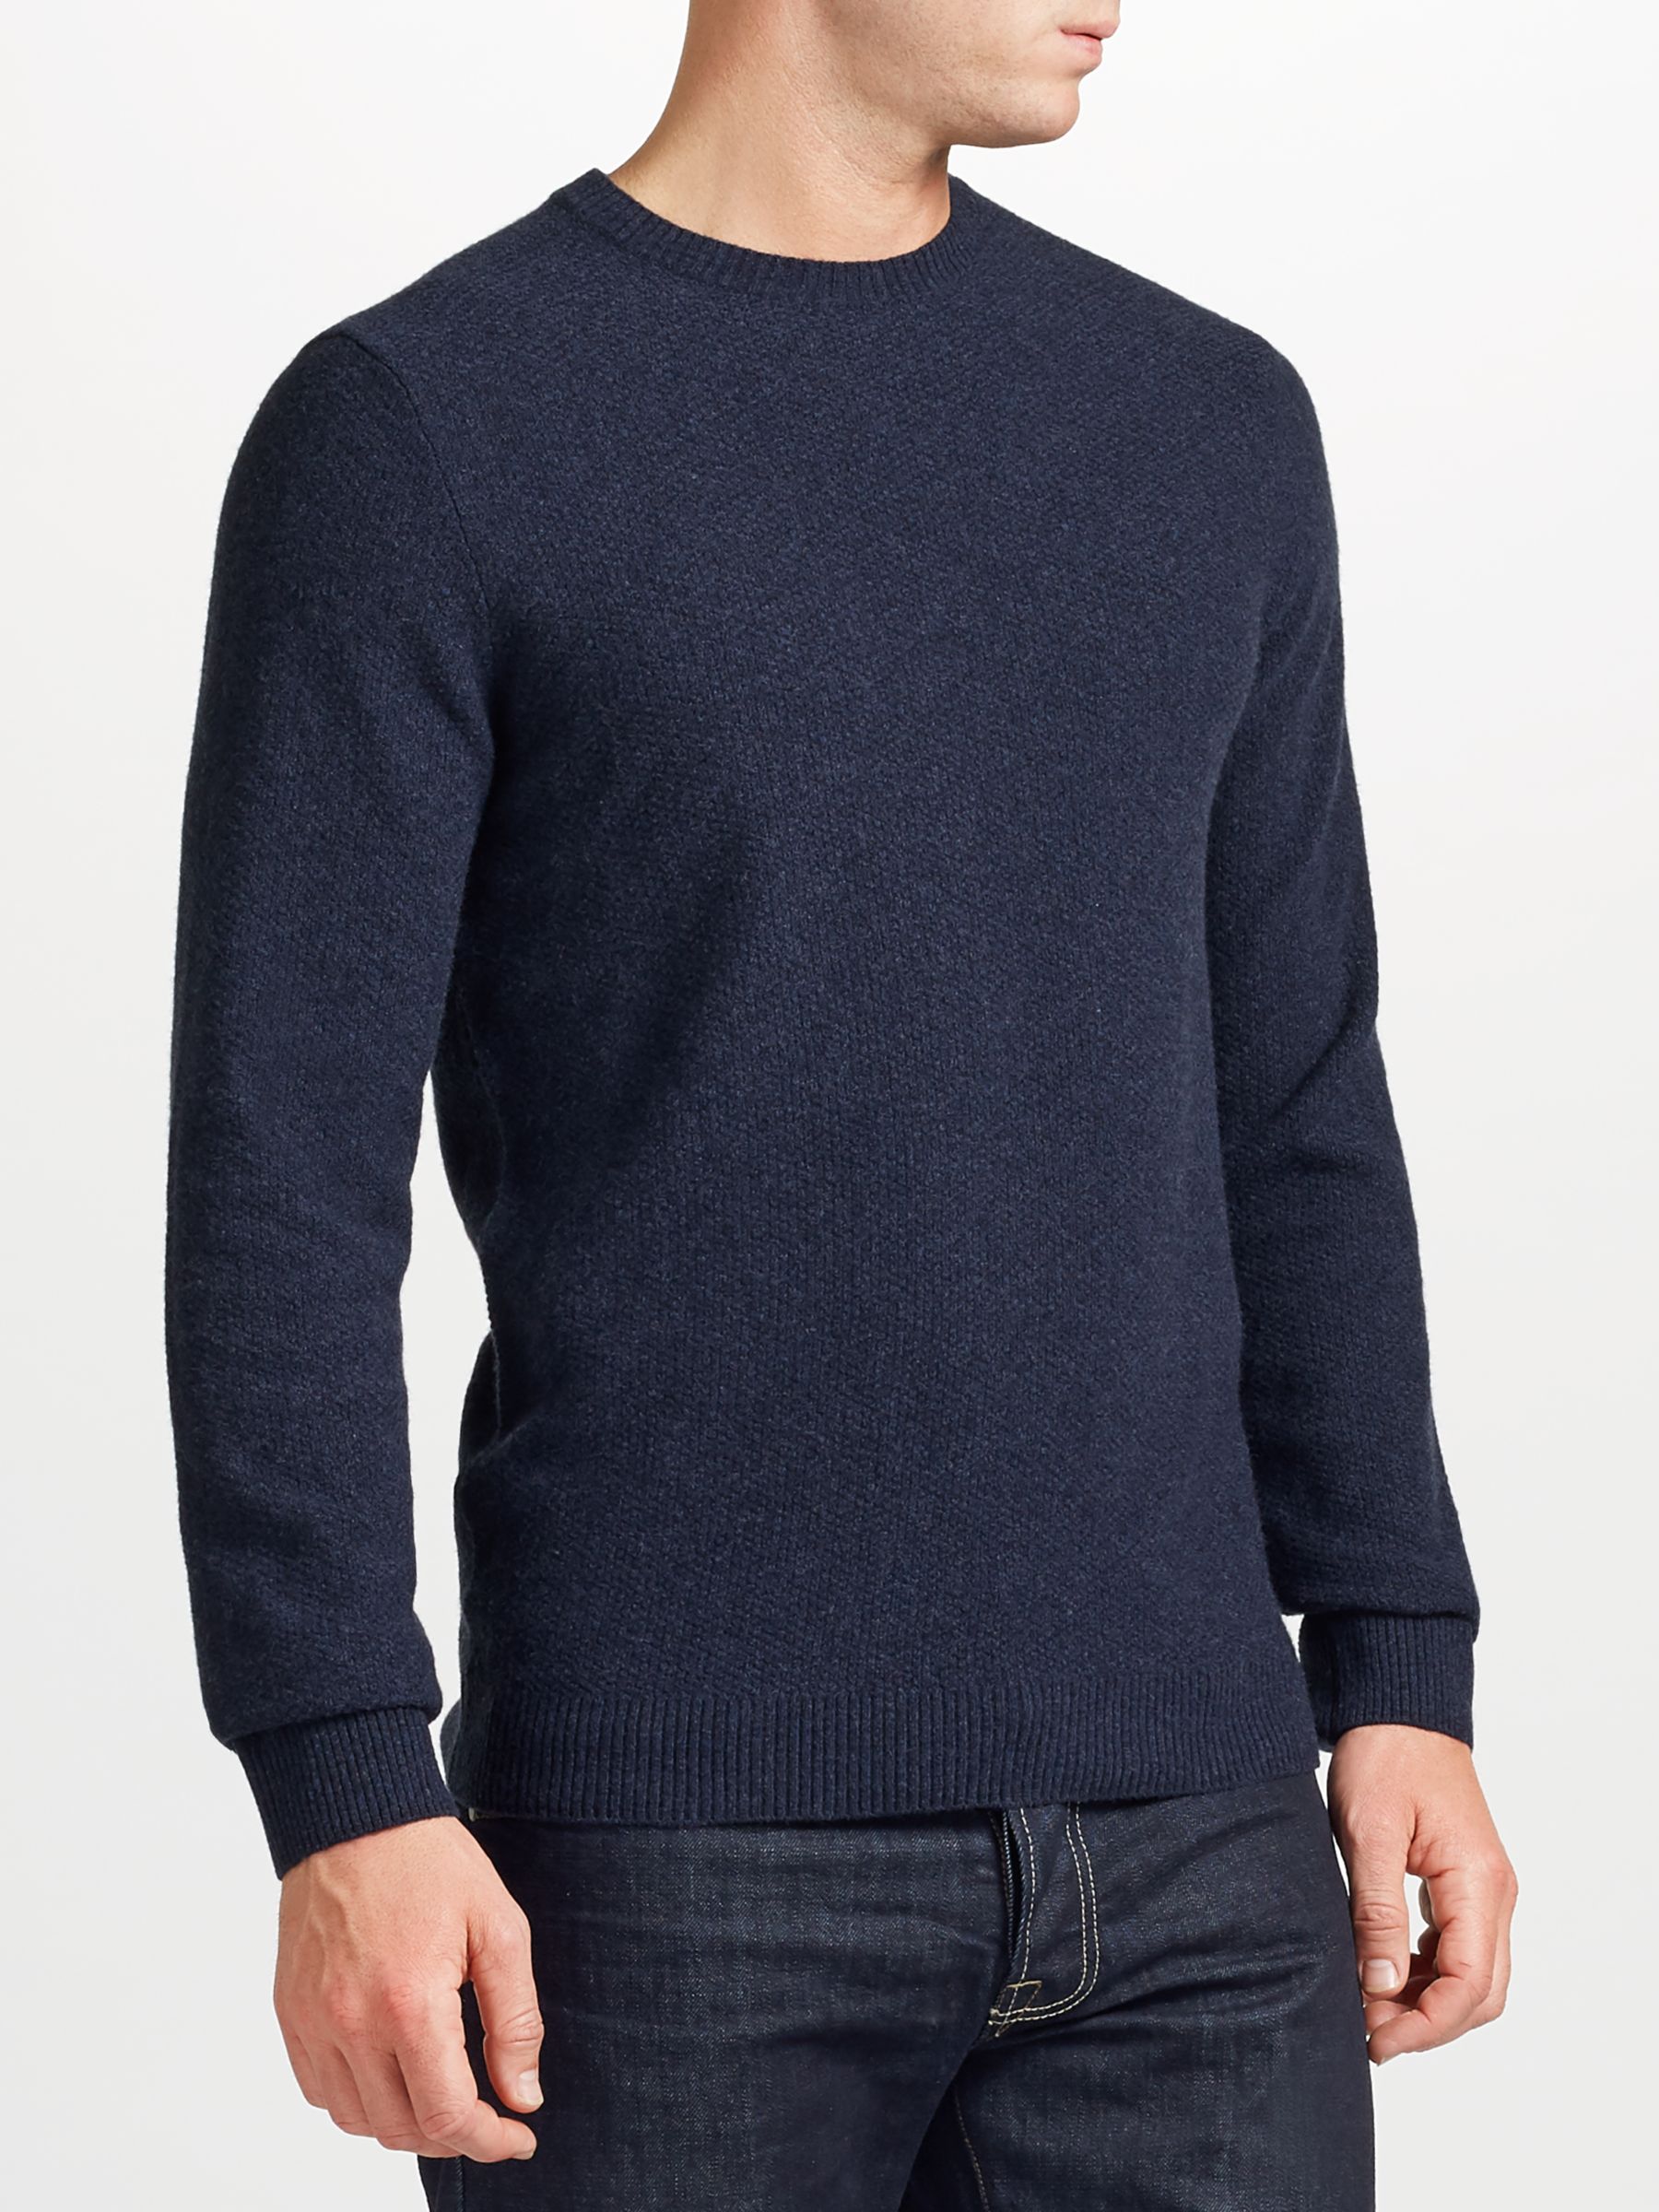 JOHN LEWIS & Co. Lambswool and Yak Jumper, Navy, XL